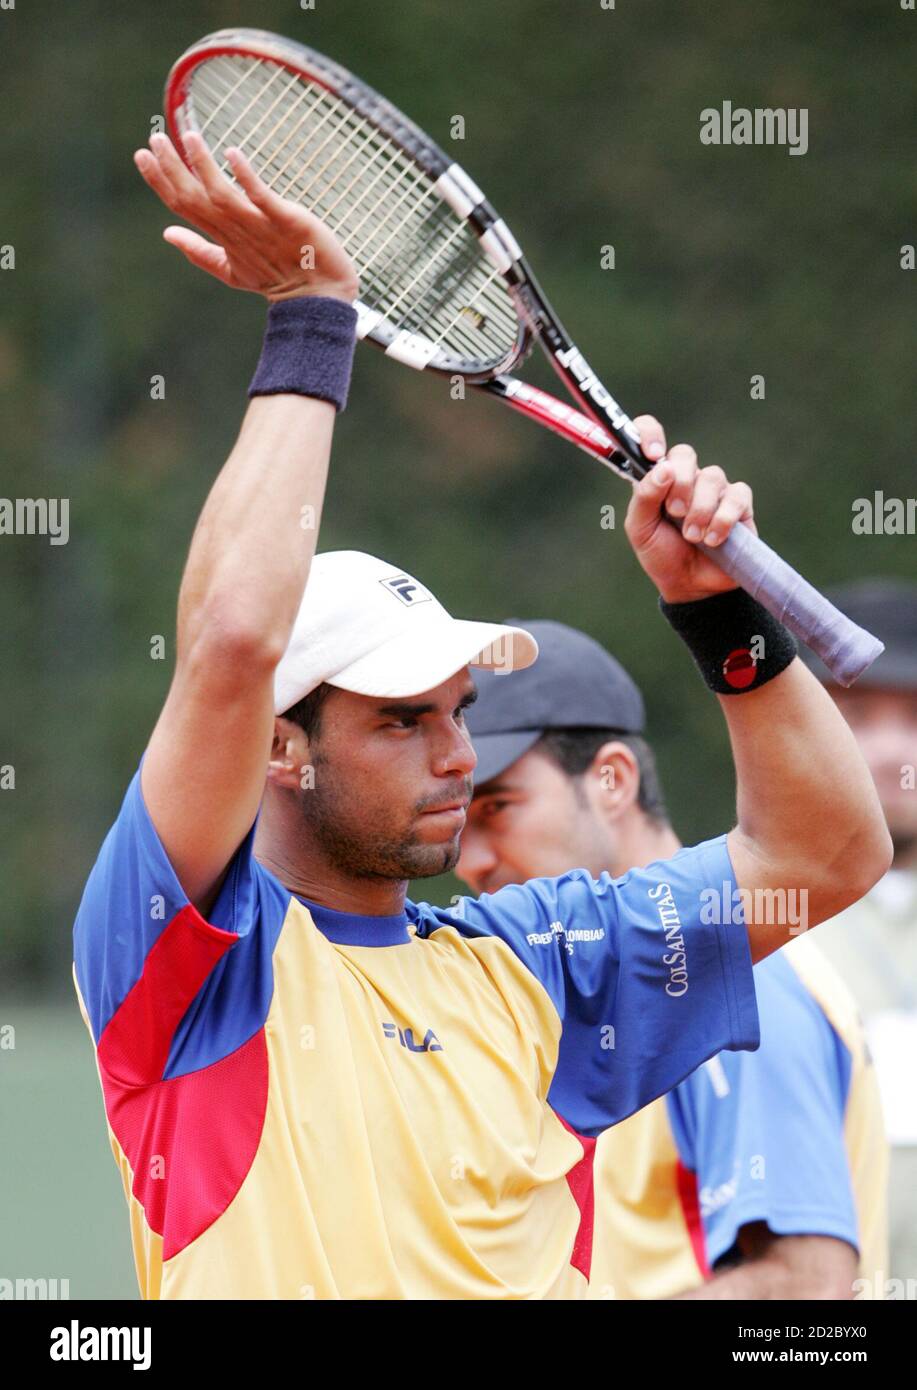 Alejandro Falla of Colombia celebrates after defeating Francisco Rodriguez  of Paraguay during their Davis Cup tennis tournament match in Bogota April  9, 2006. REUTERS/Daniel Munoz Stock Photo - Alamy